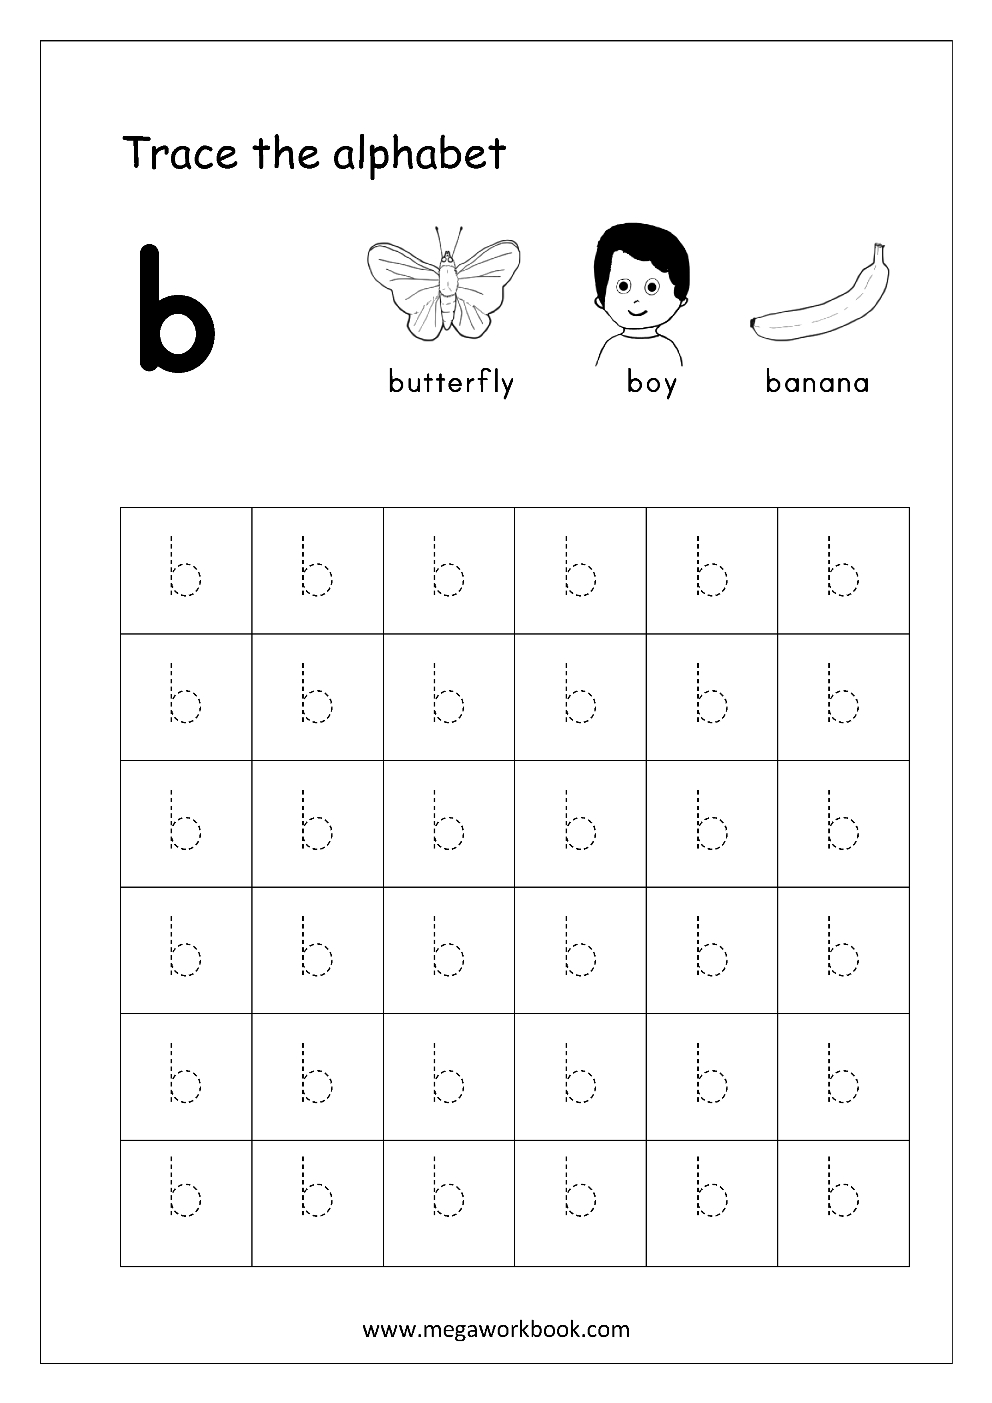 Free English Worksheets - Alphabet Tracing (Small Letters On with regard to Alphabet Tracing Worksheets Lowercase